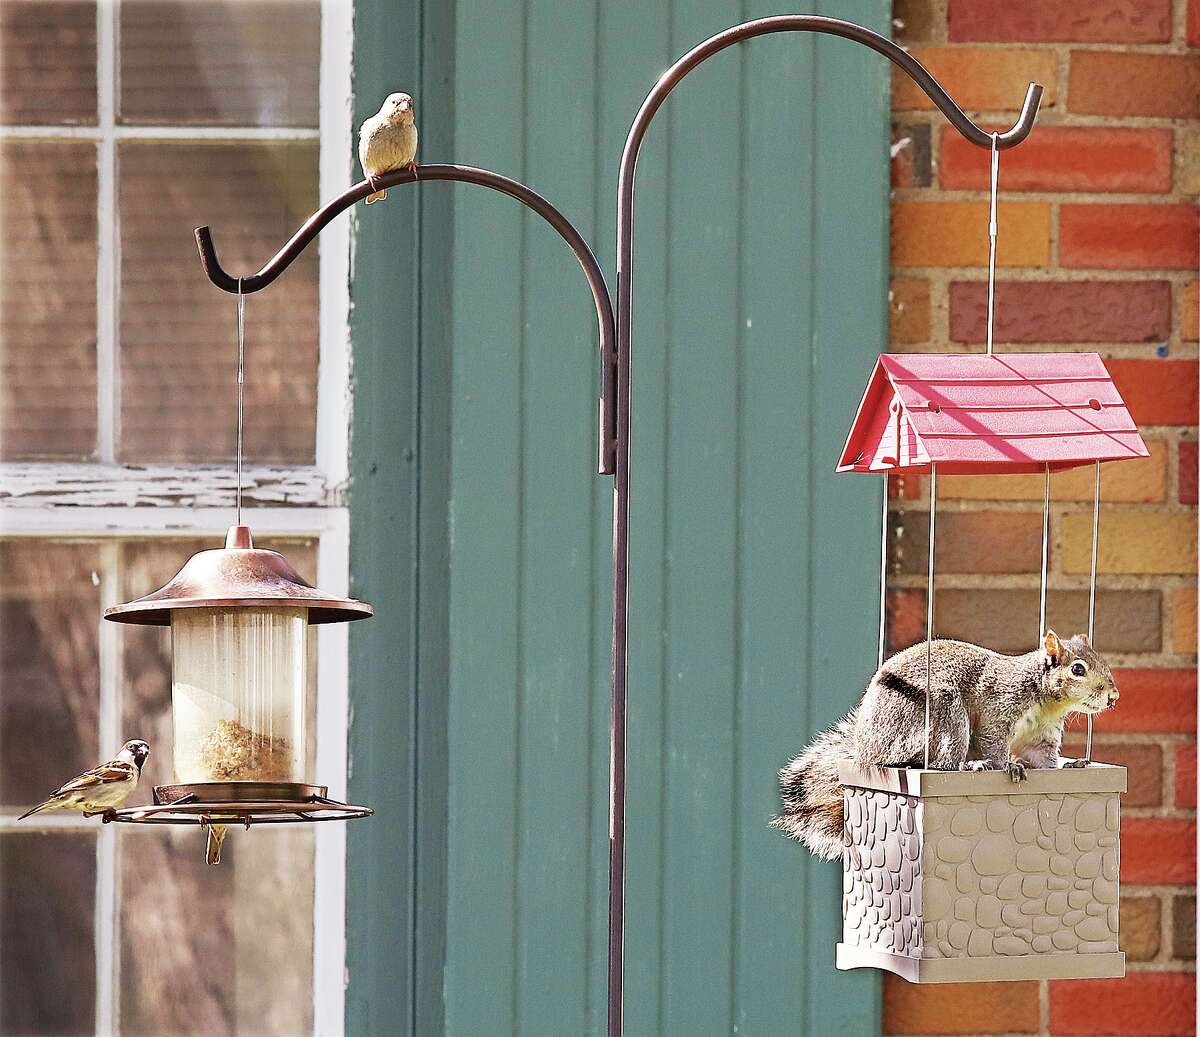 John Badman|The Telegraph A squirrel decided to join his friends this week at a feeder in the 3600 block of Aberdeen Avenue in Alton. The Illinois Department of Natural Resources recently asked state residents to stop using their bird feeders and birdbaths until at least May 31. The effort is help to slow the spread of Avian Flu that has infected many differnt bird species, including bald eagles. Some 30 million cases have been found in 33 states and the flu can be spread to humans, poultry, cats and dogs, pigs, tigers, leopards, ferrets and rats. The squirrel is a close cousin to rats and mice though there have not been any publicised cases of the bird flu in squirrels yet. Avoid contact with bird feces, which is a common method of spread. DNR officials also recommend washing your feeders with a diluted concentration of bleach water to disinfect them.